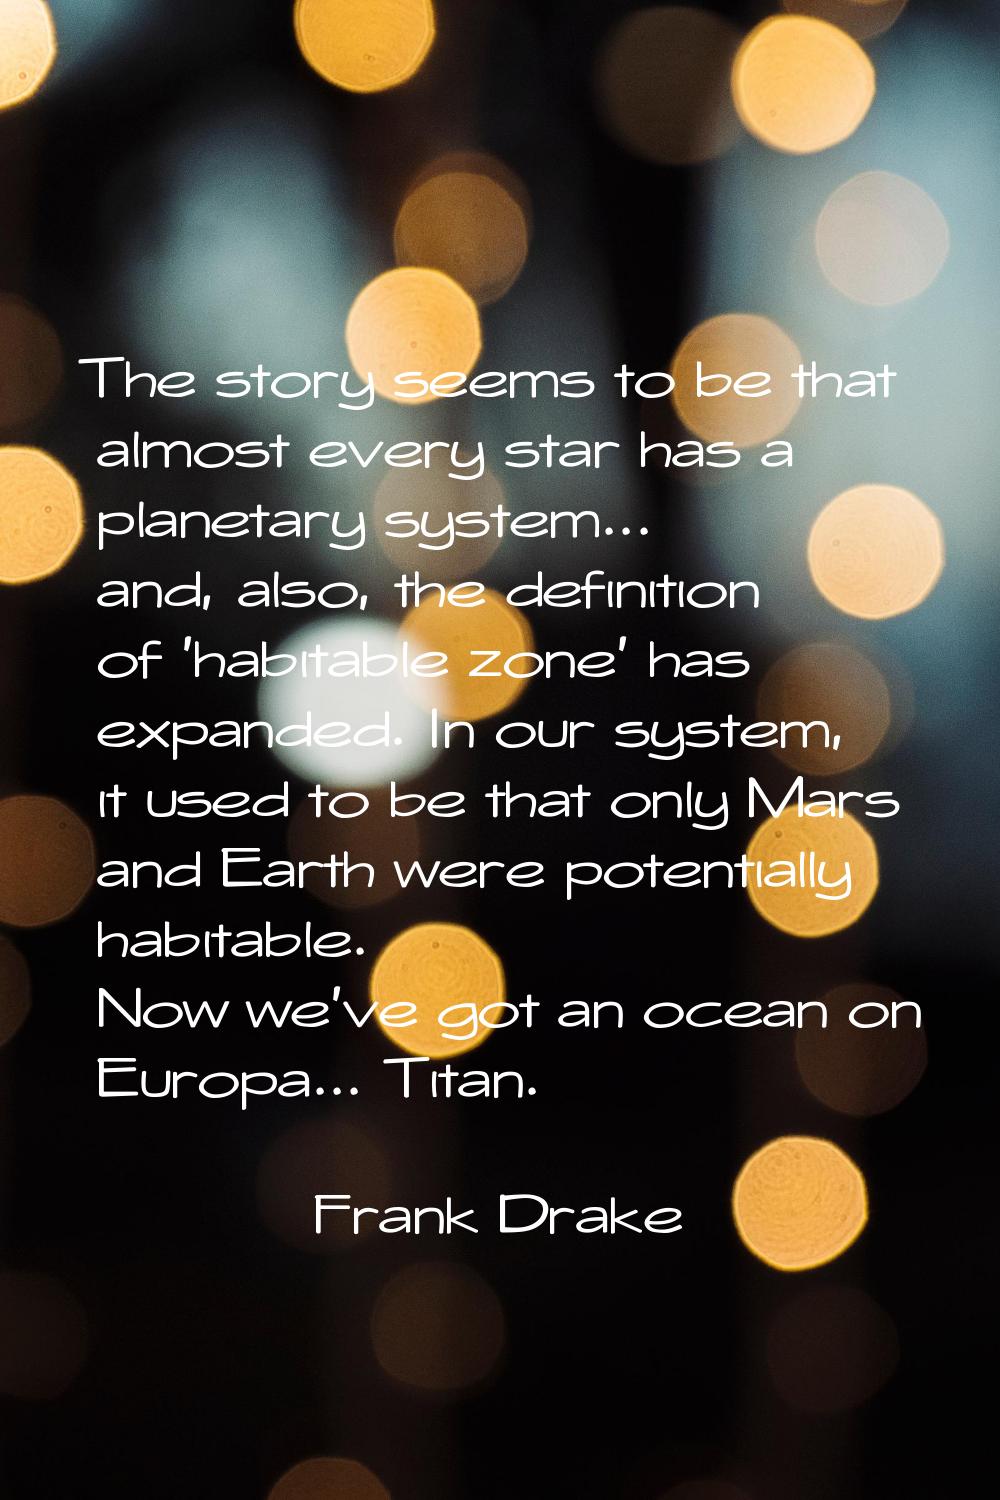 The story seems to be that almost every star has a planetary system... and, also, the definition of